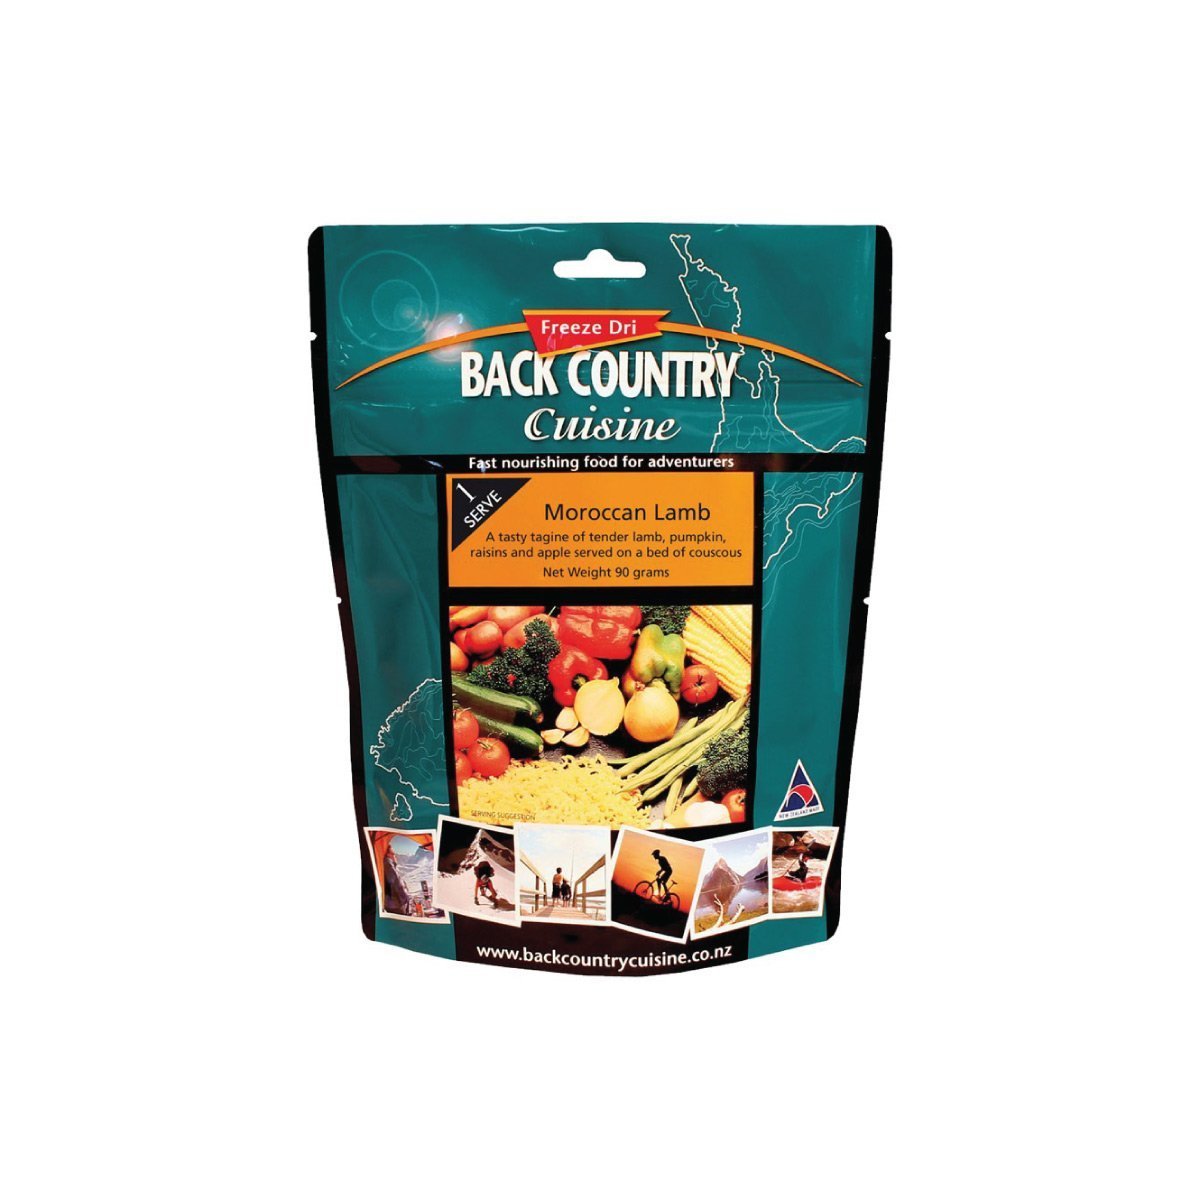 Back Country Cuisine Moroccan Lamb - Pack of 10 Outdoor and Survival Products Back Country Cuisine 1 Serve (90g) Tactical Gear Supplier Tactical Distributors Australia